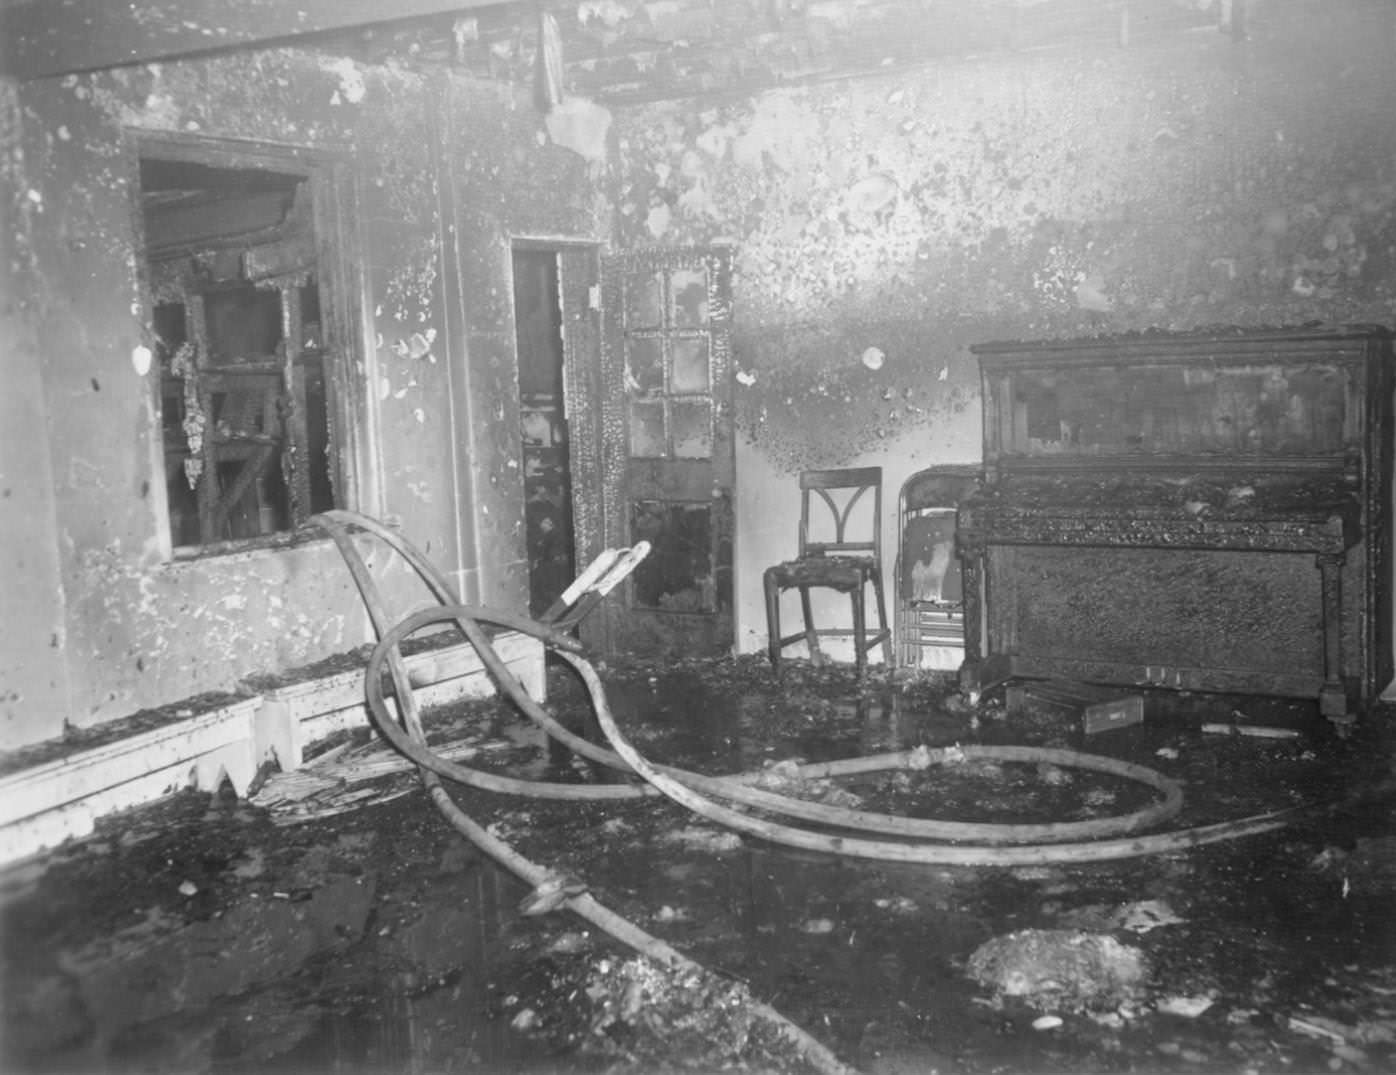 Aftermath of Fire at Hancock Recreation Center, 1965.